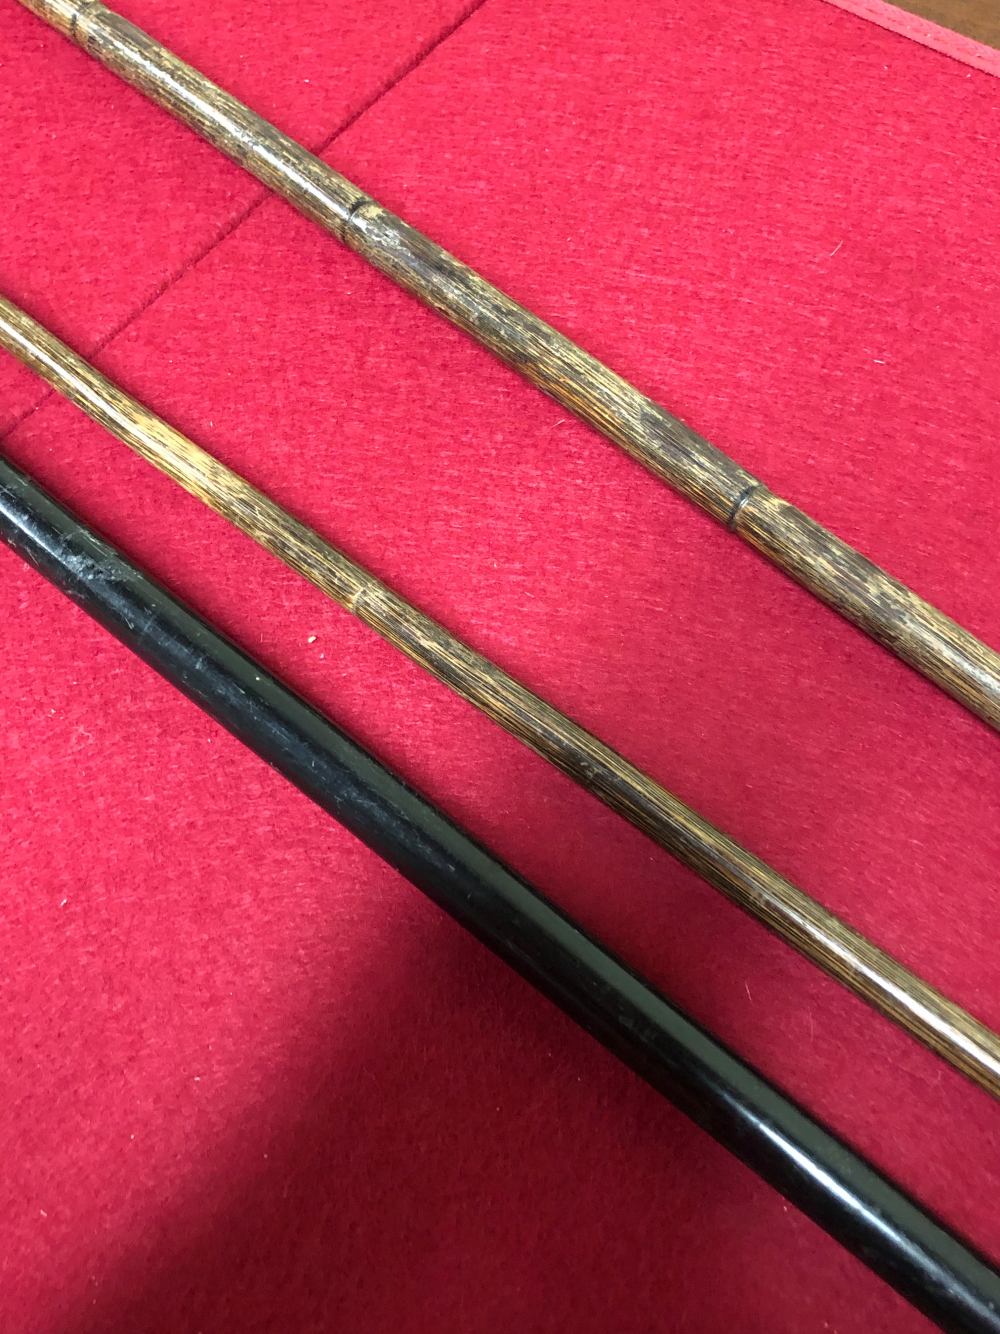 A SILVER TOPPED BLACK MALACCA WALKING CANE AND TWO BAMBOO WALKING STICKS WITH WHITE METAL MOUNTS - Image 18 of 20